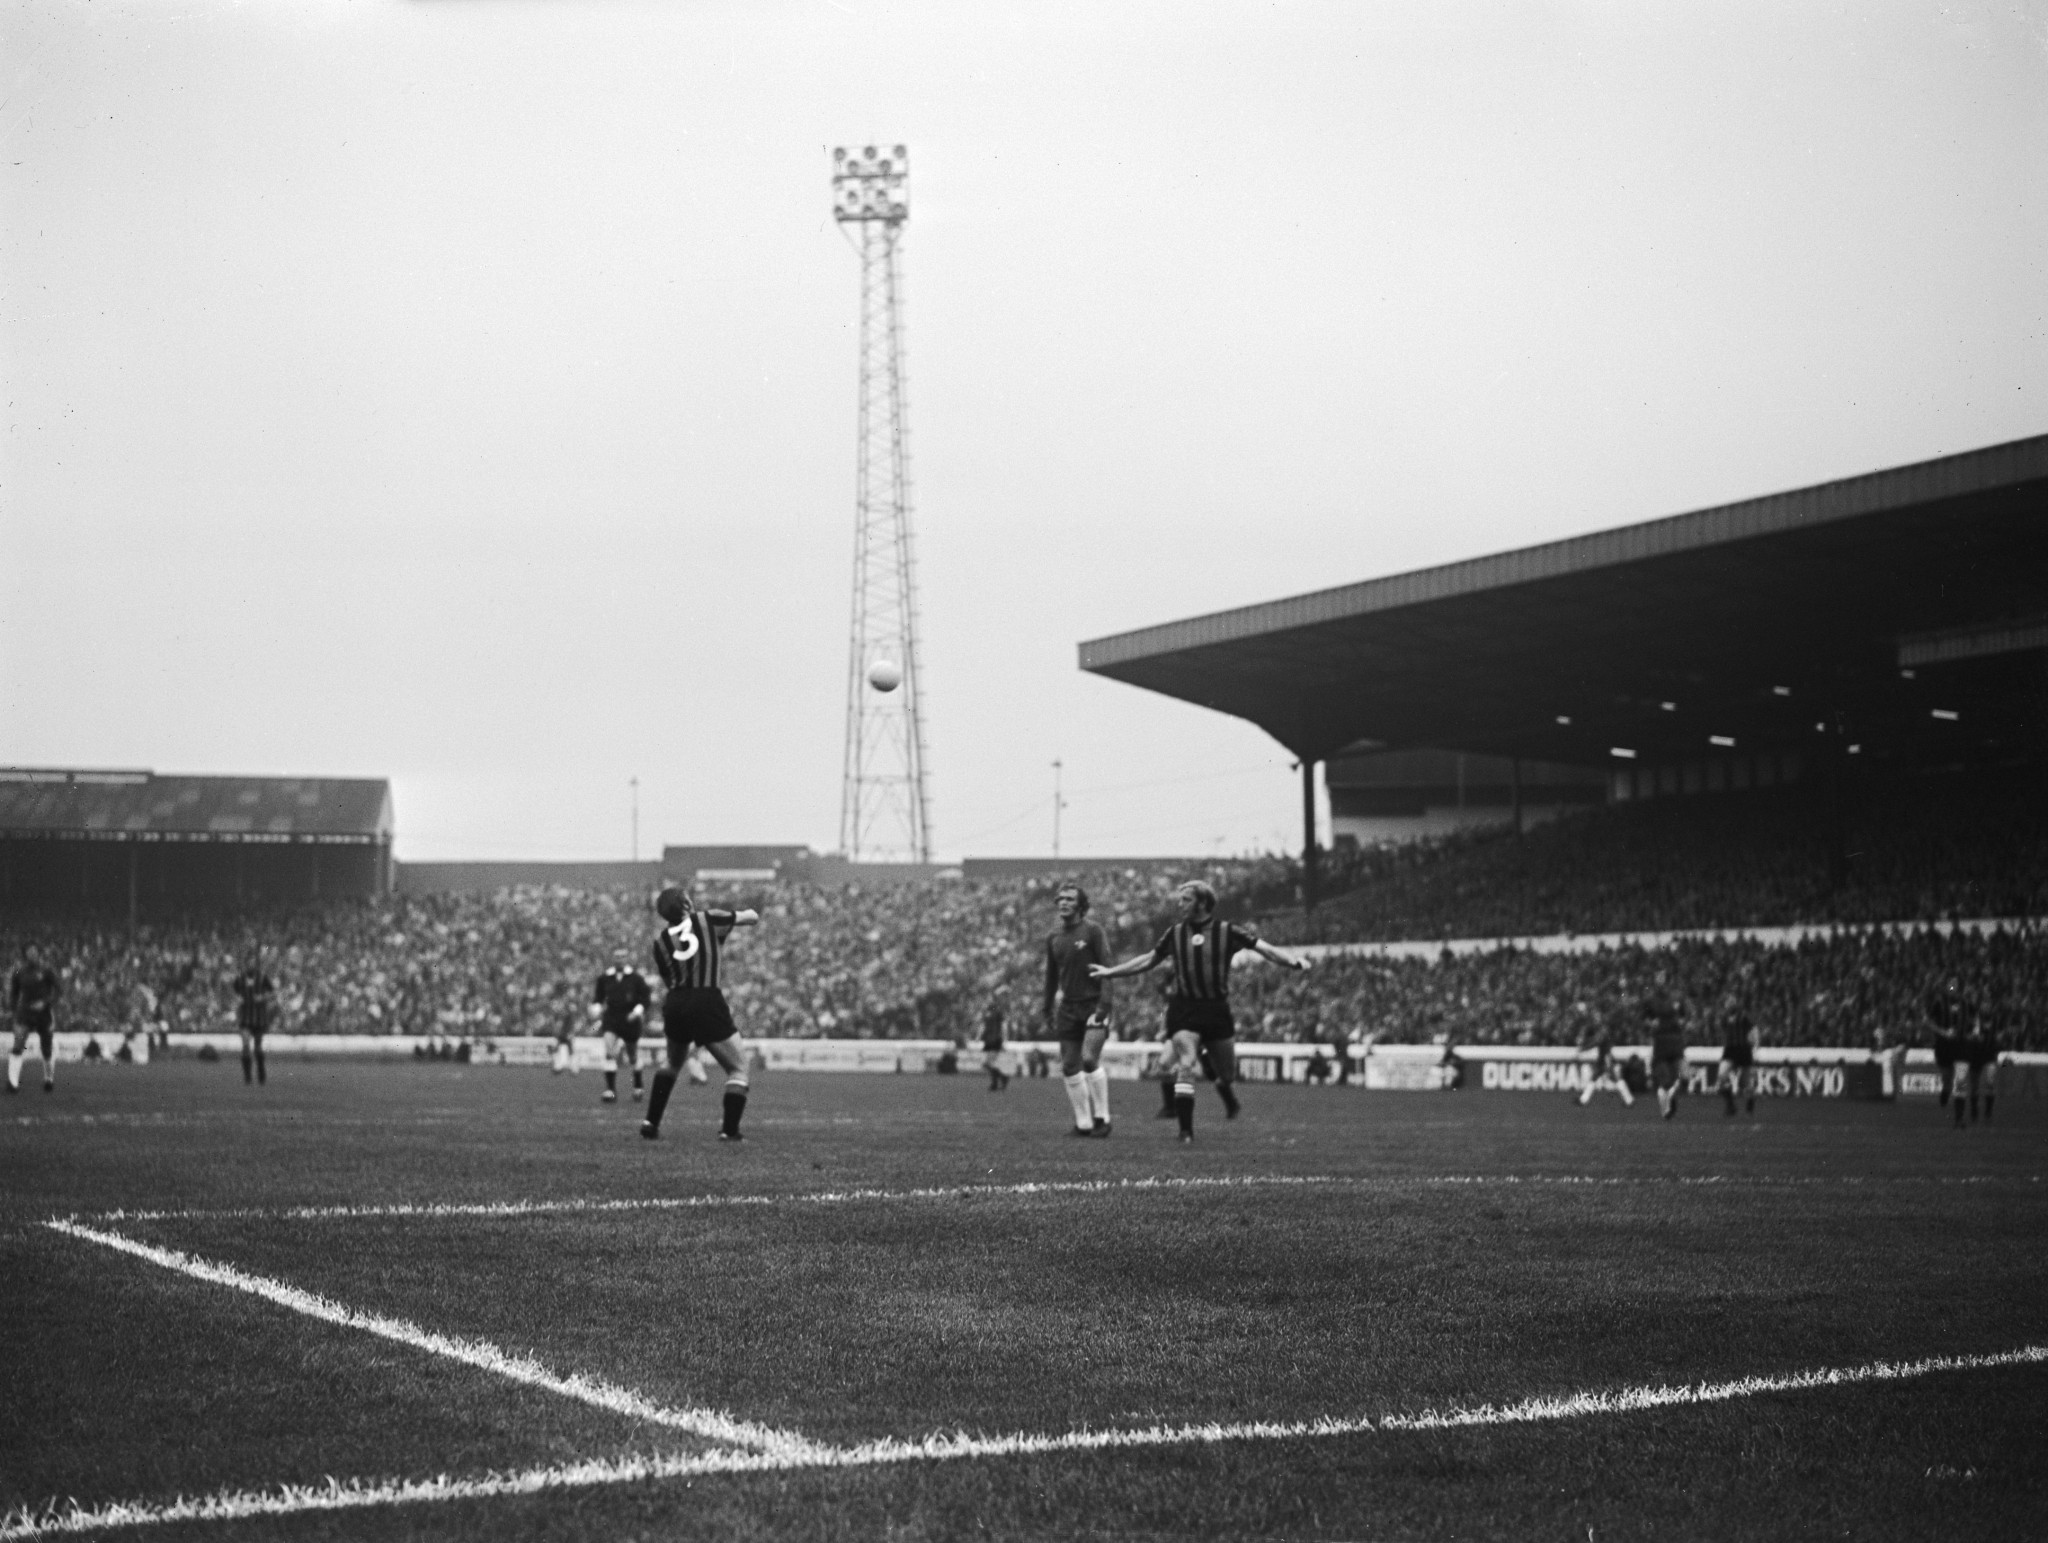 Chelsea and Man City clash at Stamford Bridge in 1971 ©Getty Images